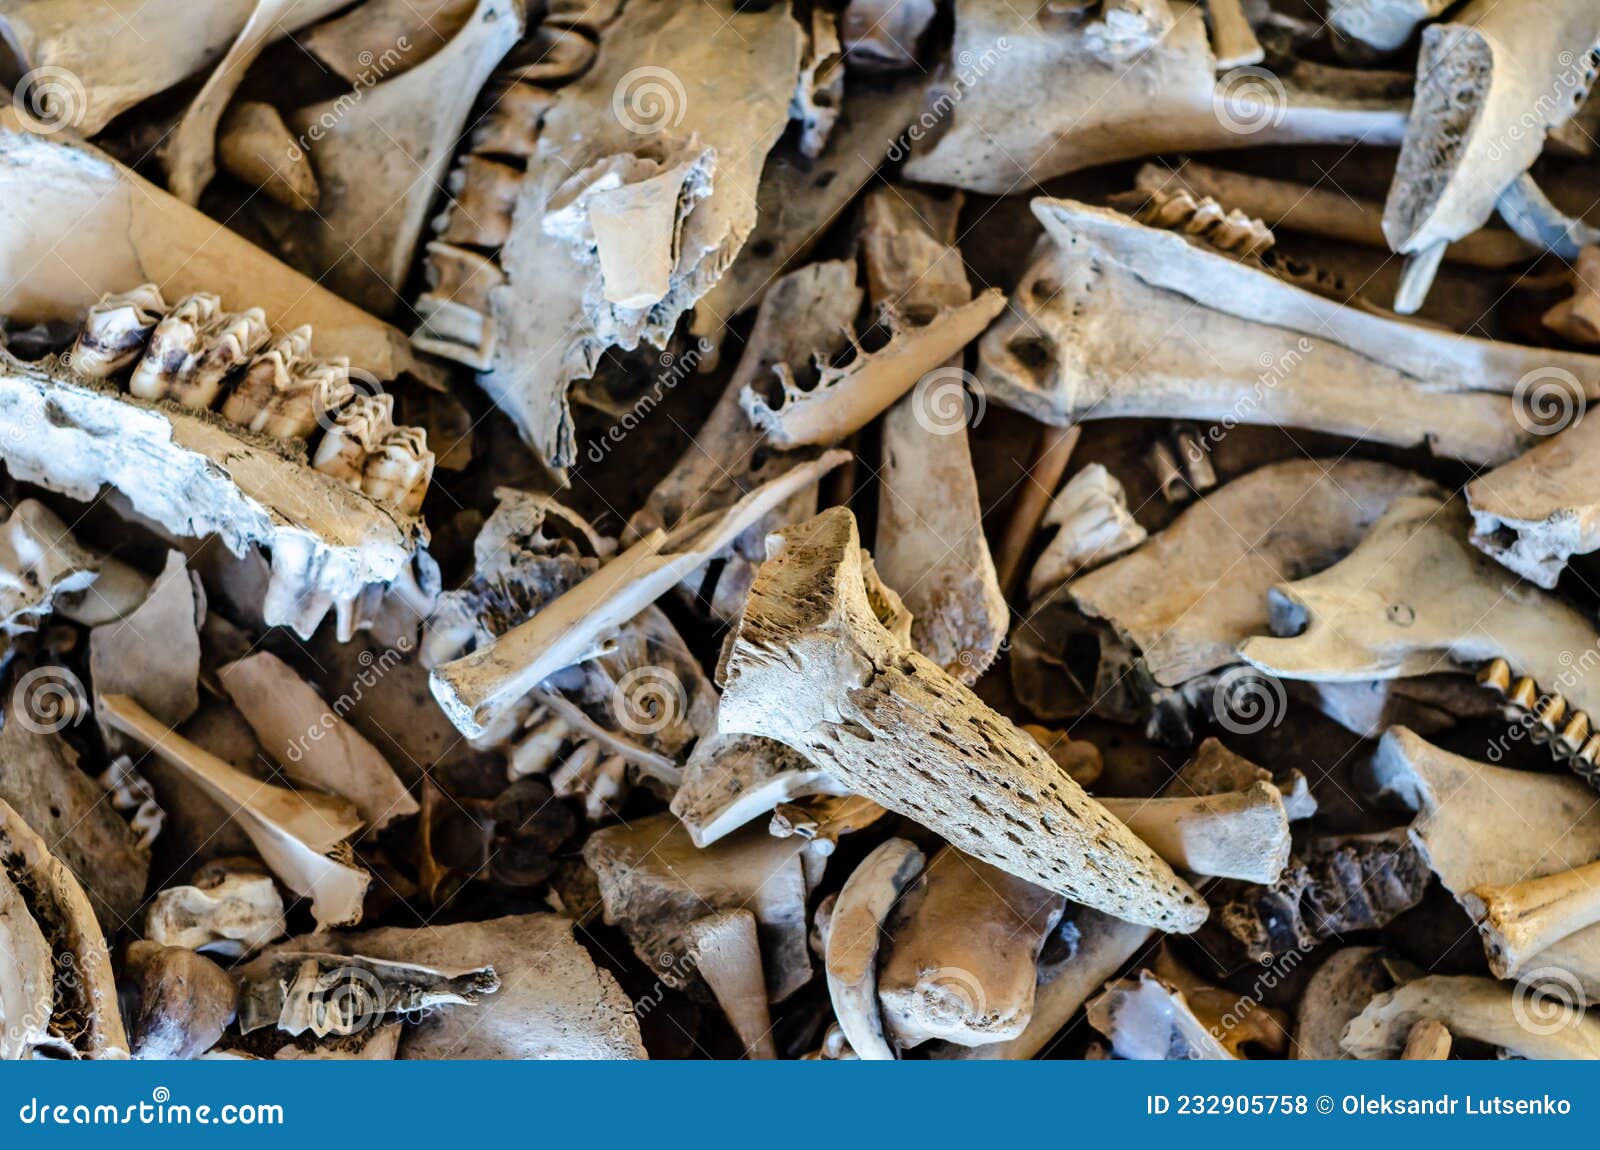 Background of the Different Animal Bones Stock Photo - Image of death,  damaged: 232905758